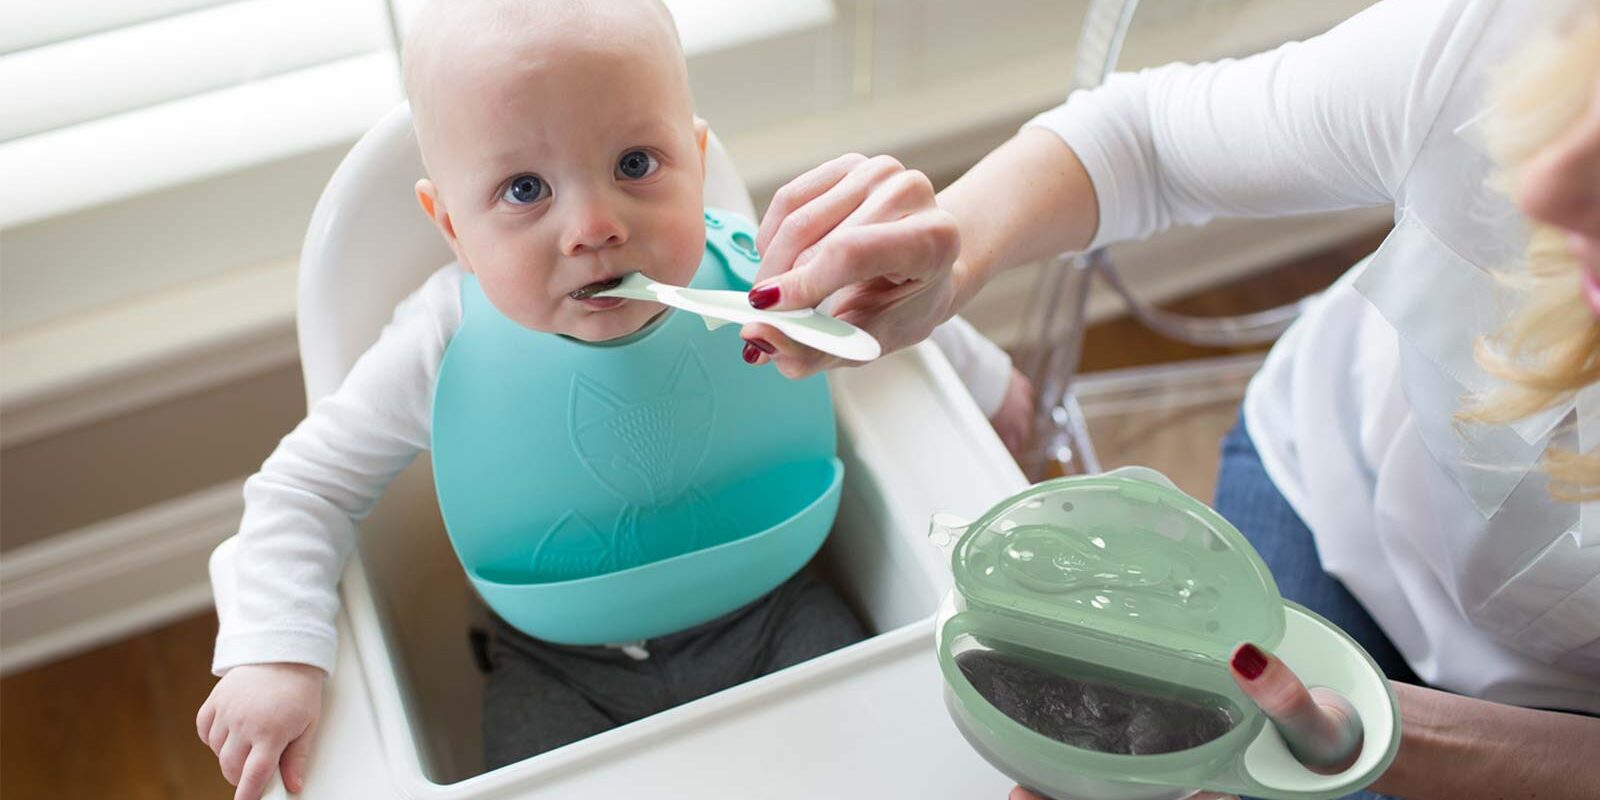 Infant being fed with bowl and light green spoon